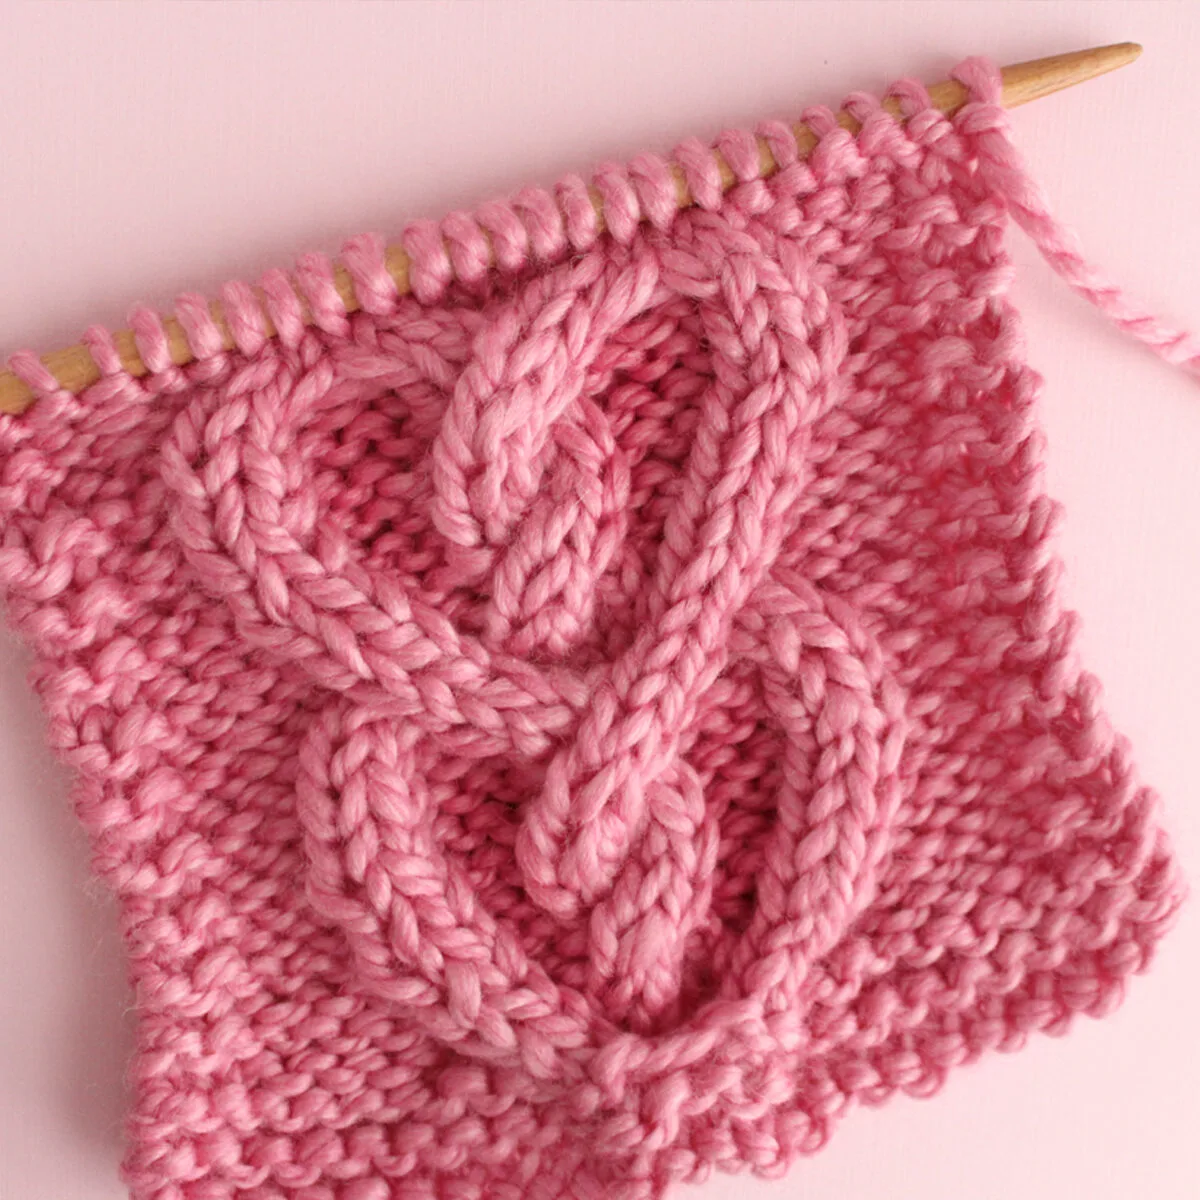 Cable Heart Knitting Pattern Swatch in Pink Yarn.